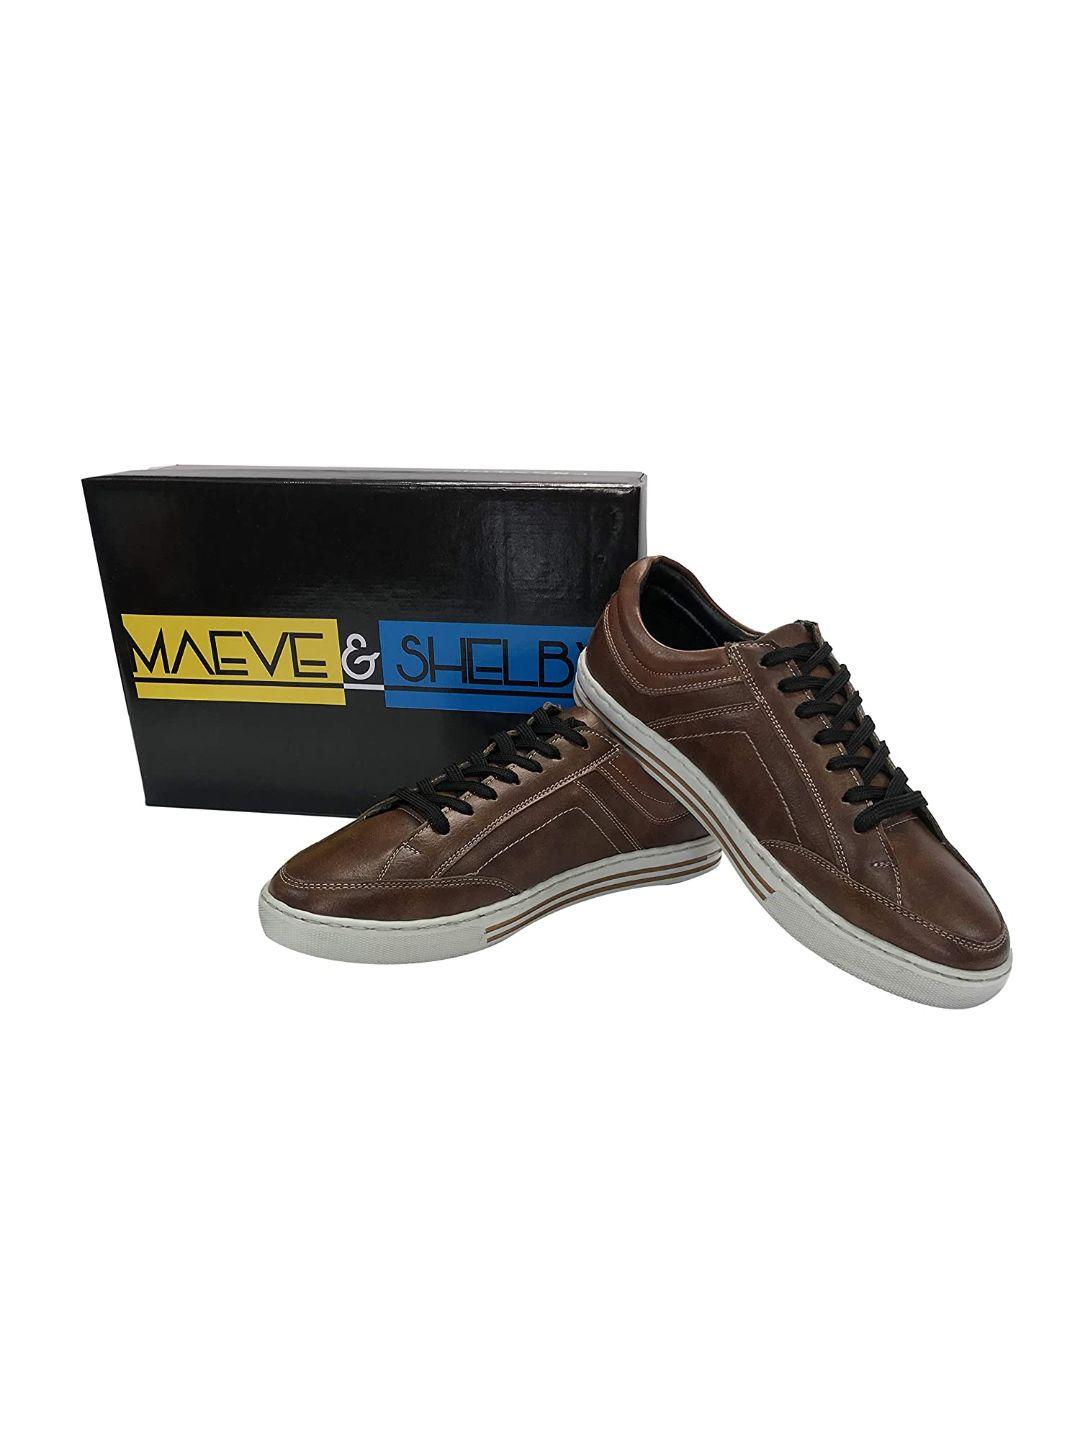 Maeve & Shelby Men's Casual Sneakers Shoes